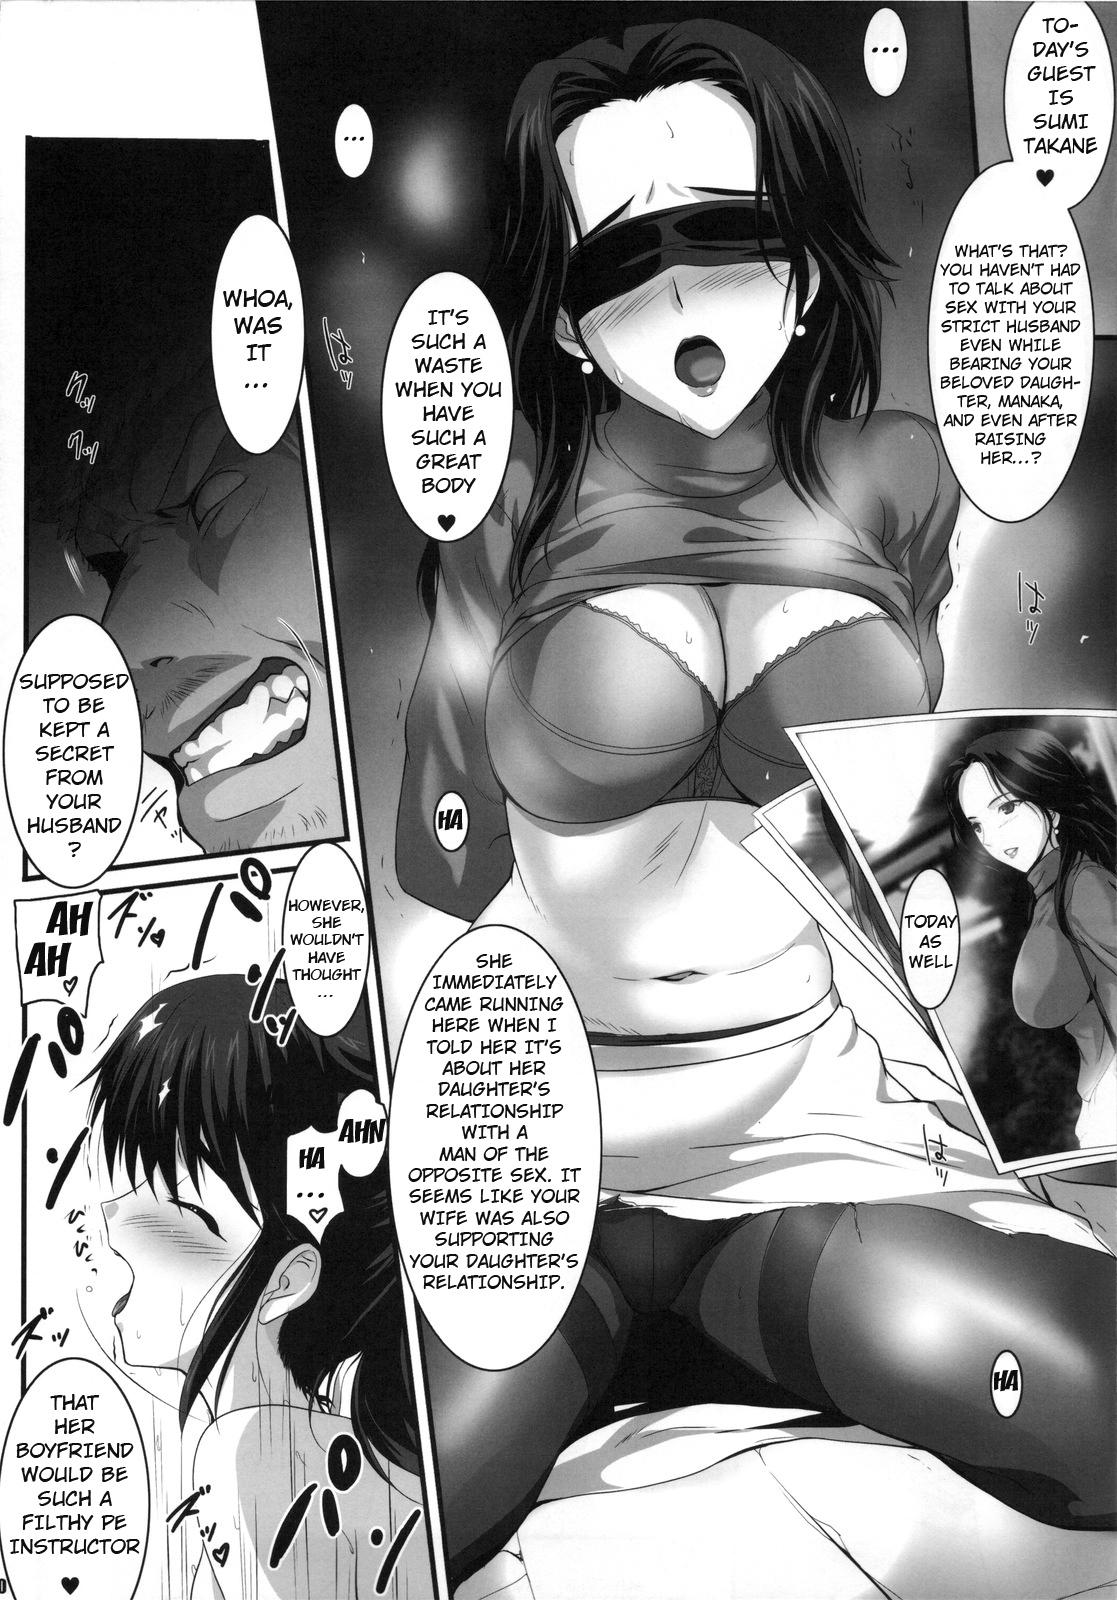 Unshaved PILE EDGE LOVE INJECTION - Love plus Lima - Page 9